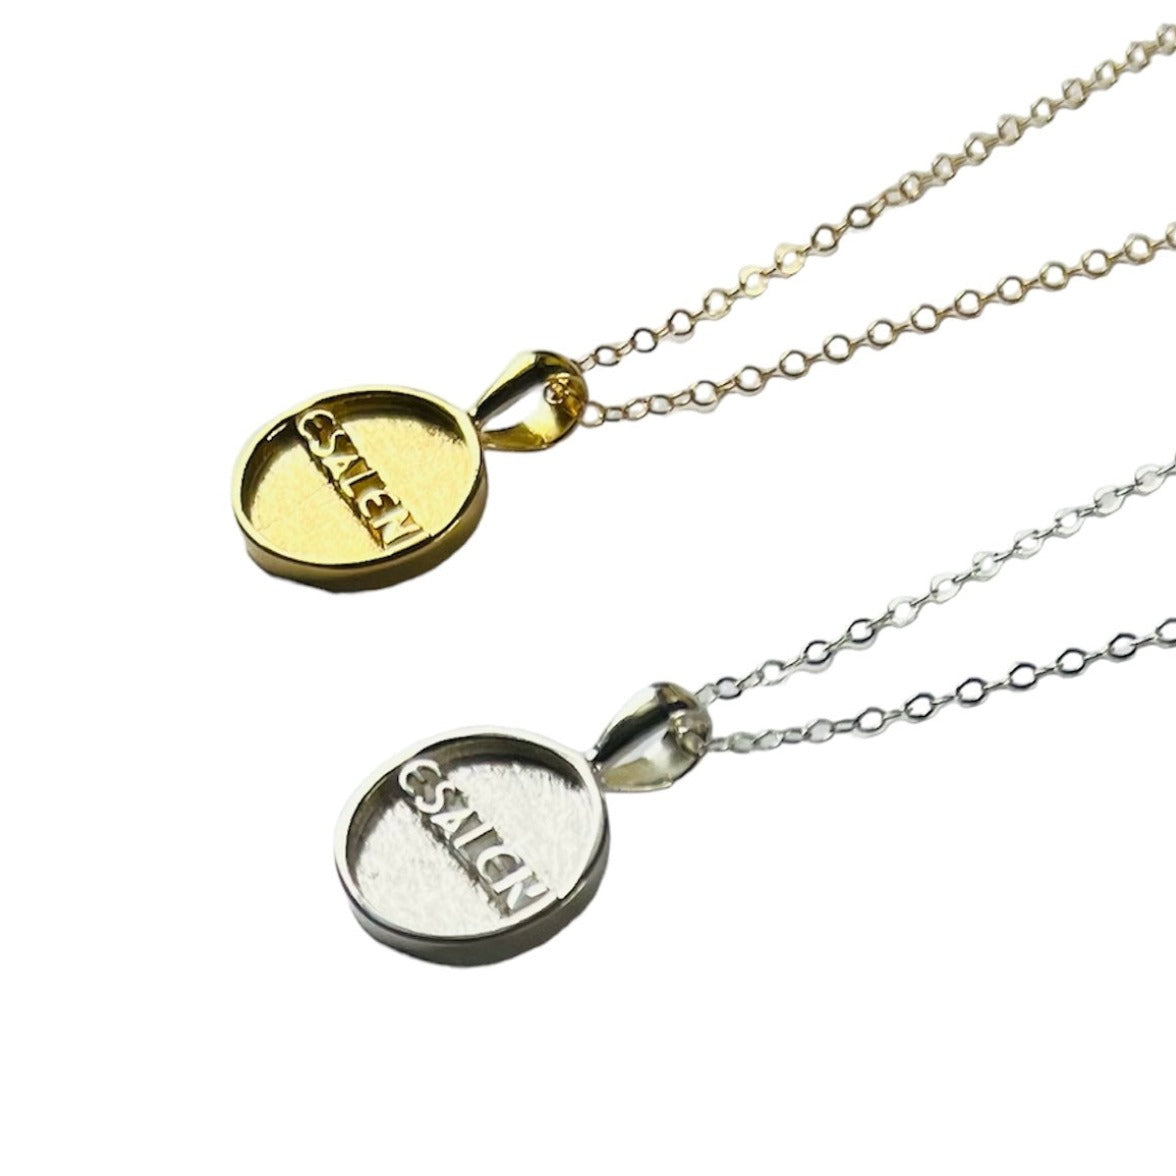 Esalen Charm Necklace in Gold